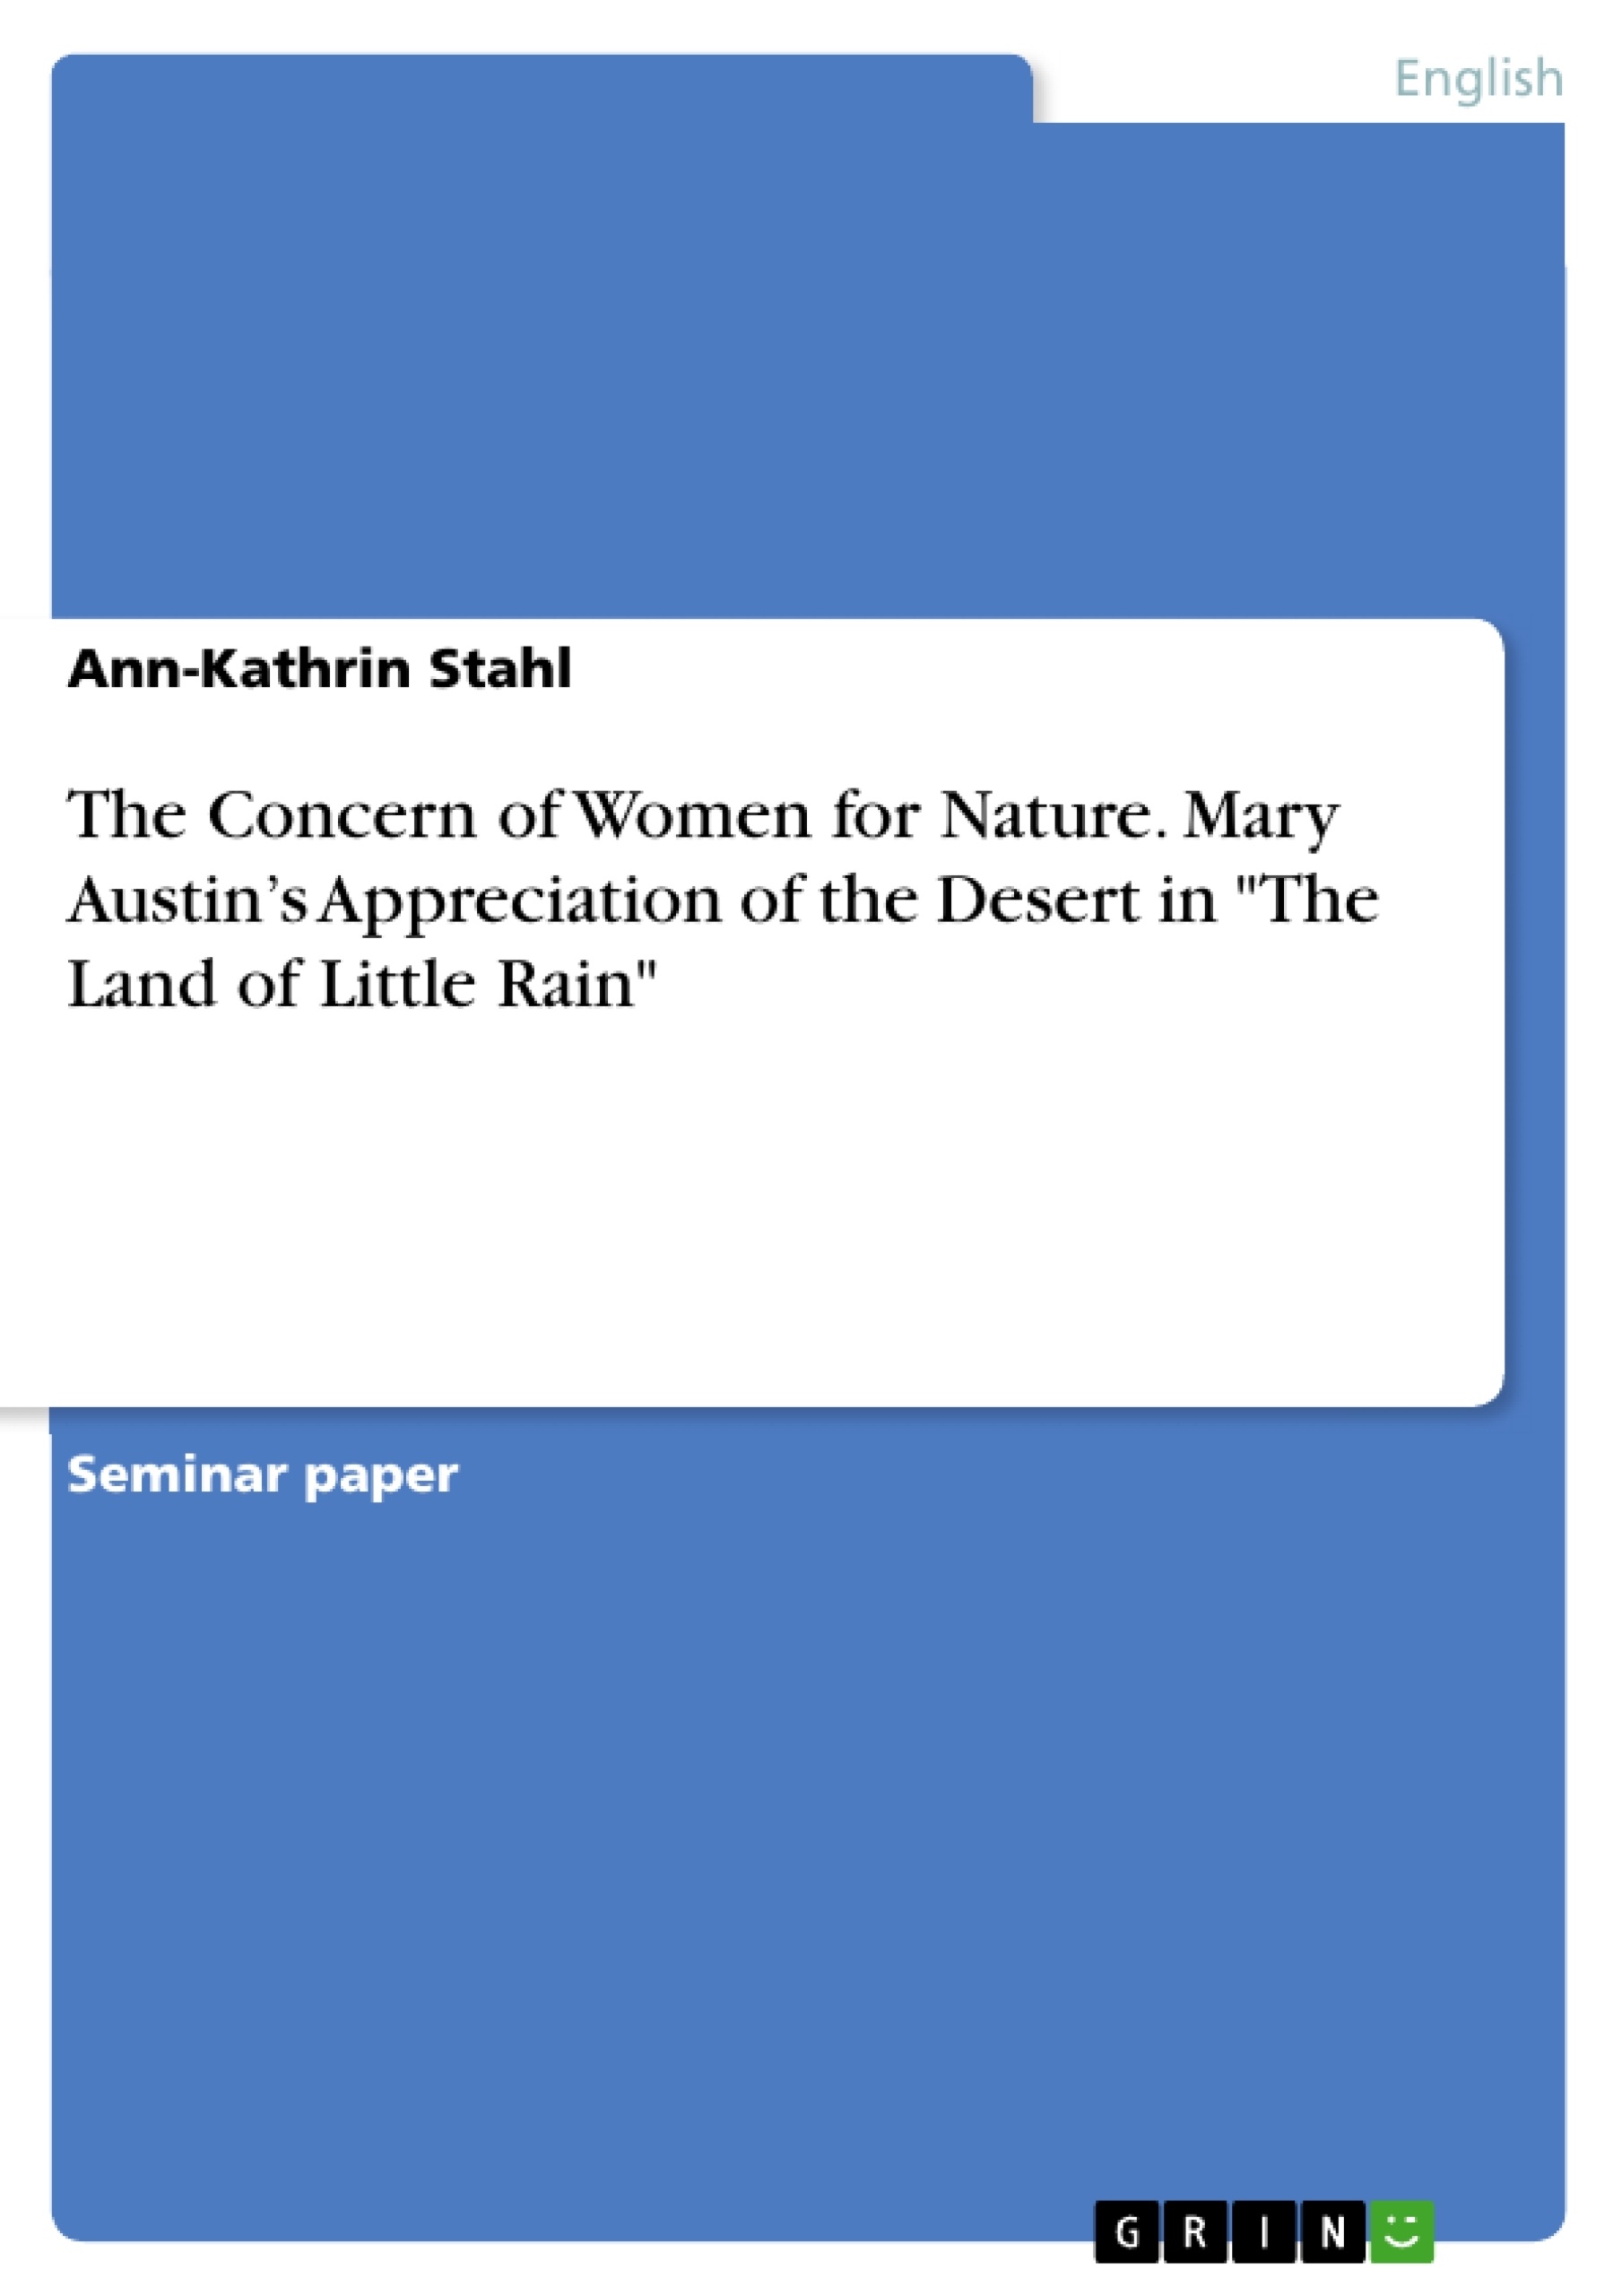 Título: The Concern of Women for Nature. Mary Austin’s Appreciation of the Desert in "The Land of Little Rain"